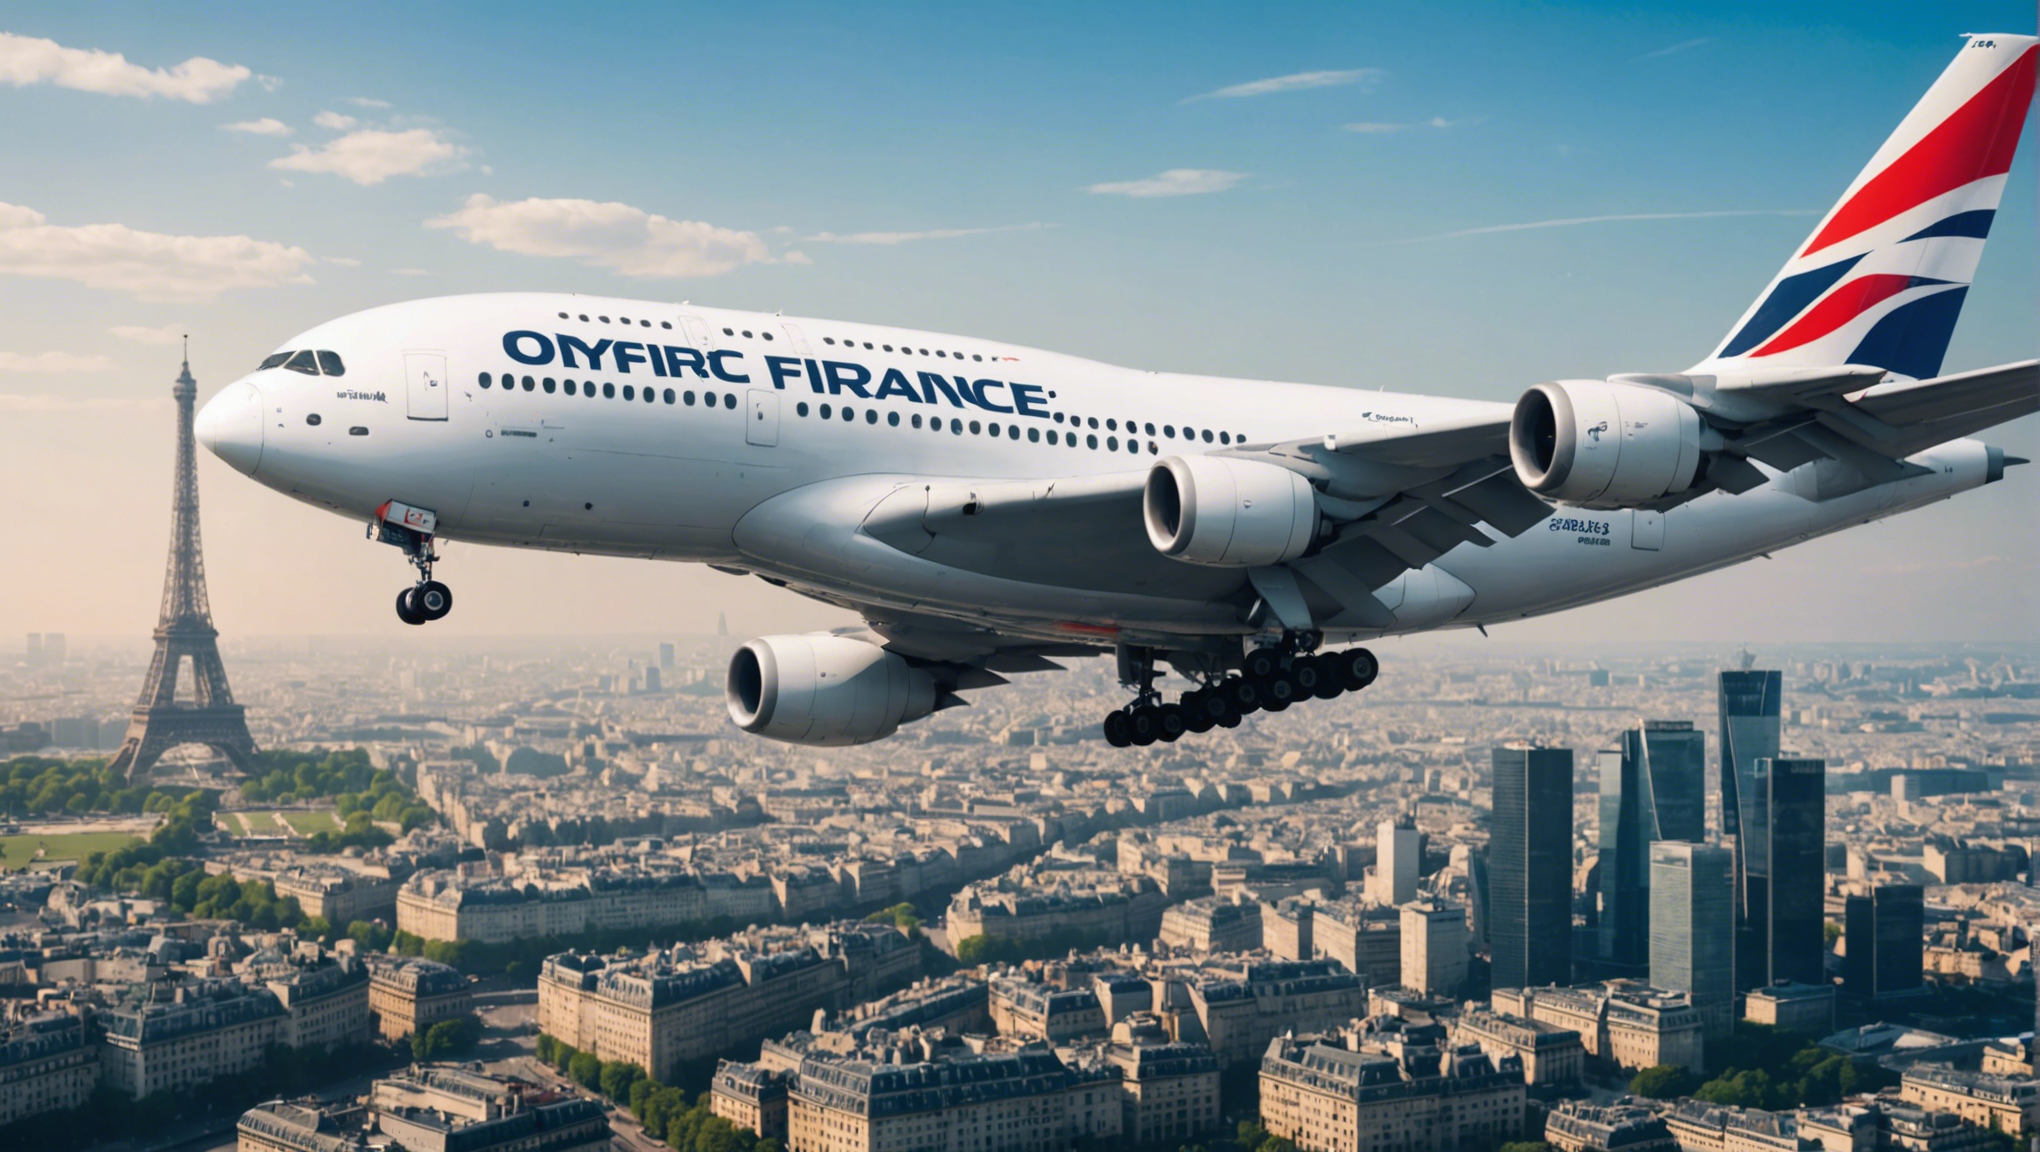 find out how a fifth of the athletes taking part in the paris 2024 olympics will travel with air france, the official airline of the games, providing quality service and essential support to athletes around the world.